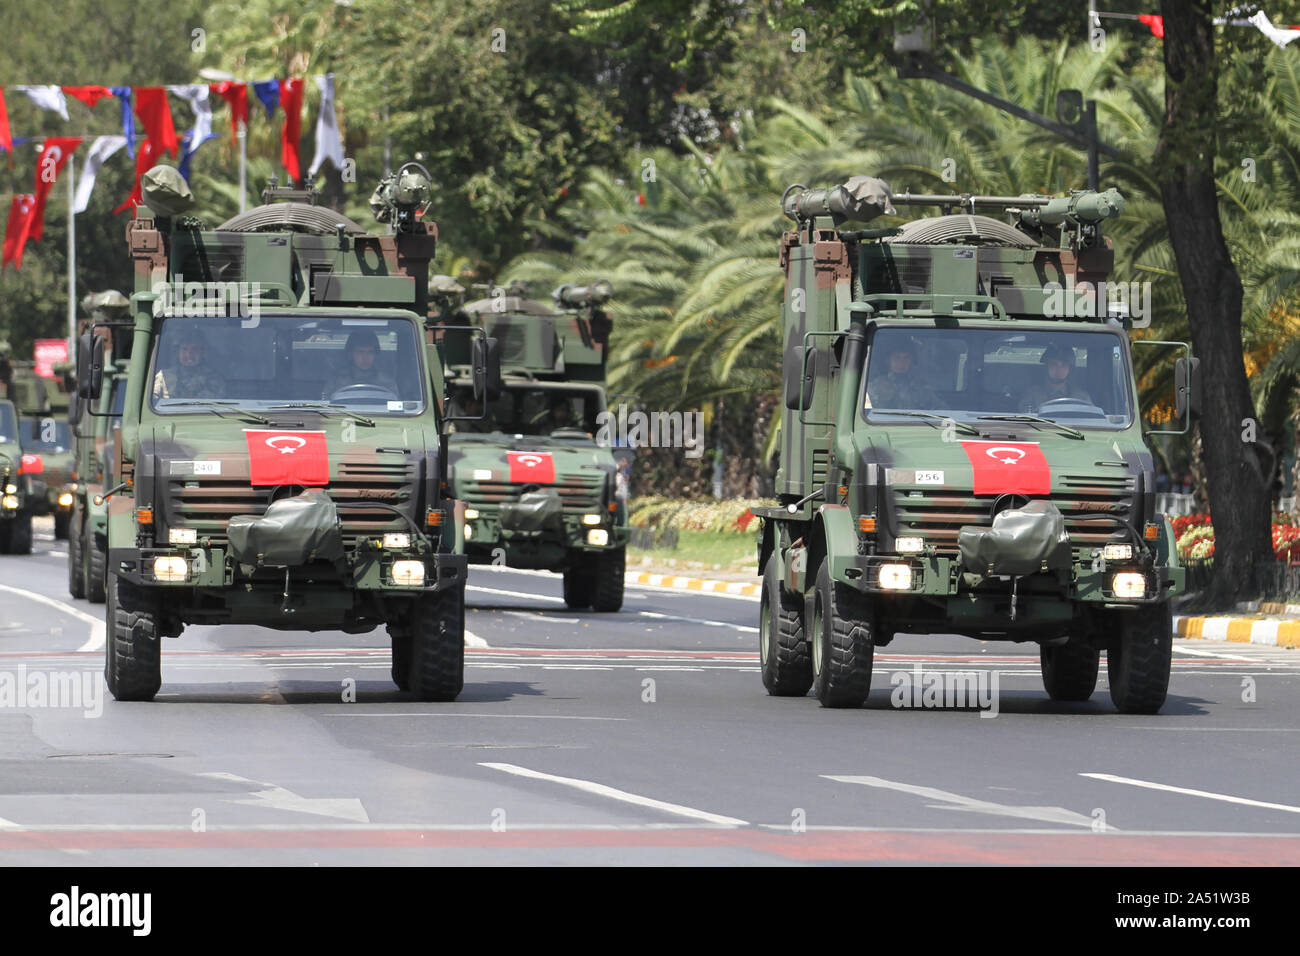 ISTANBUL, TURKEY - AUGUST 30, 2019: Military vehicle during 97th anniversary of 30 August Turkish Victory Day parade on Vatan Avenue Stock Photo